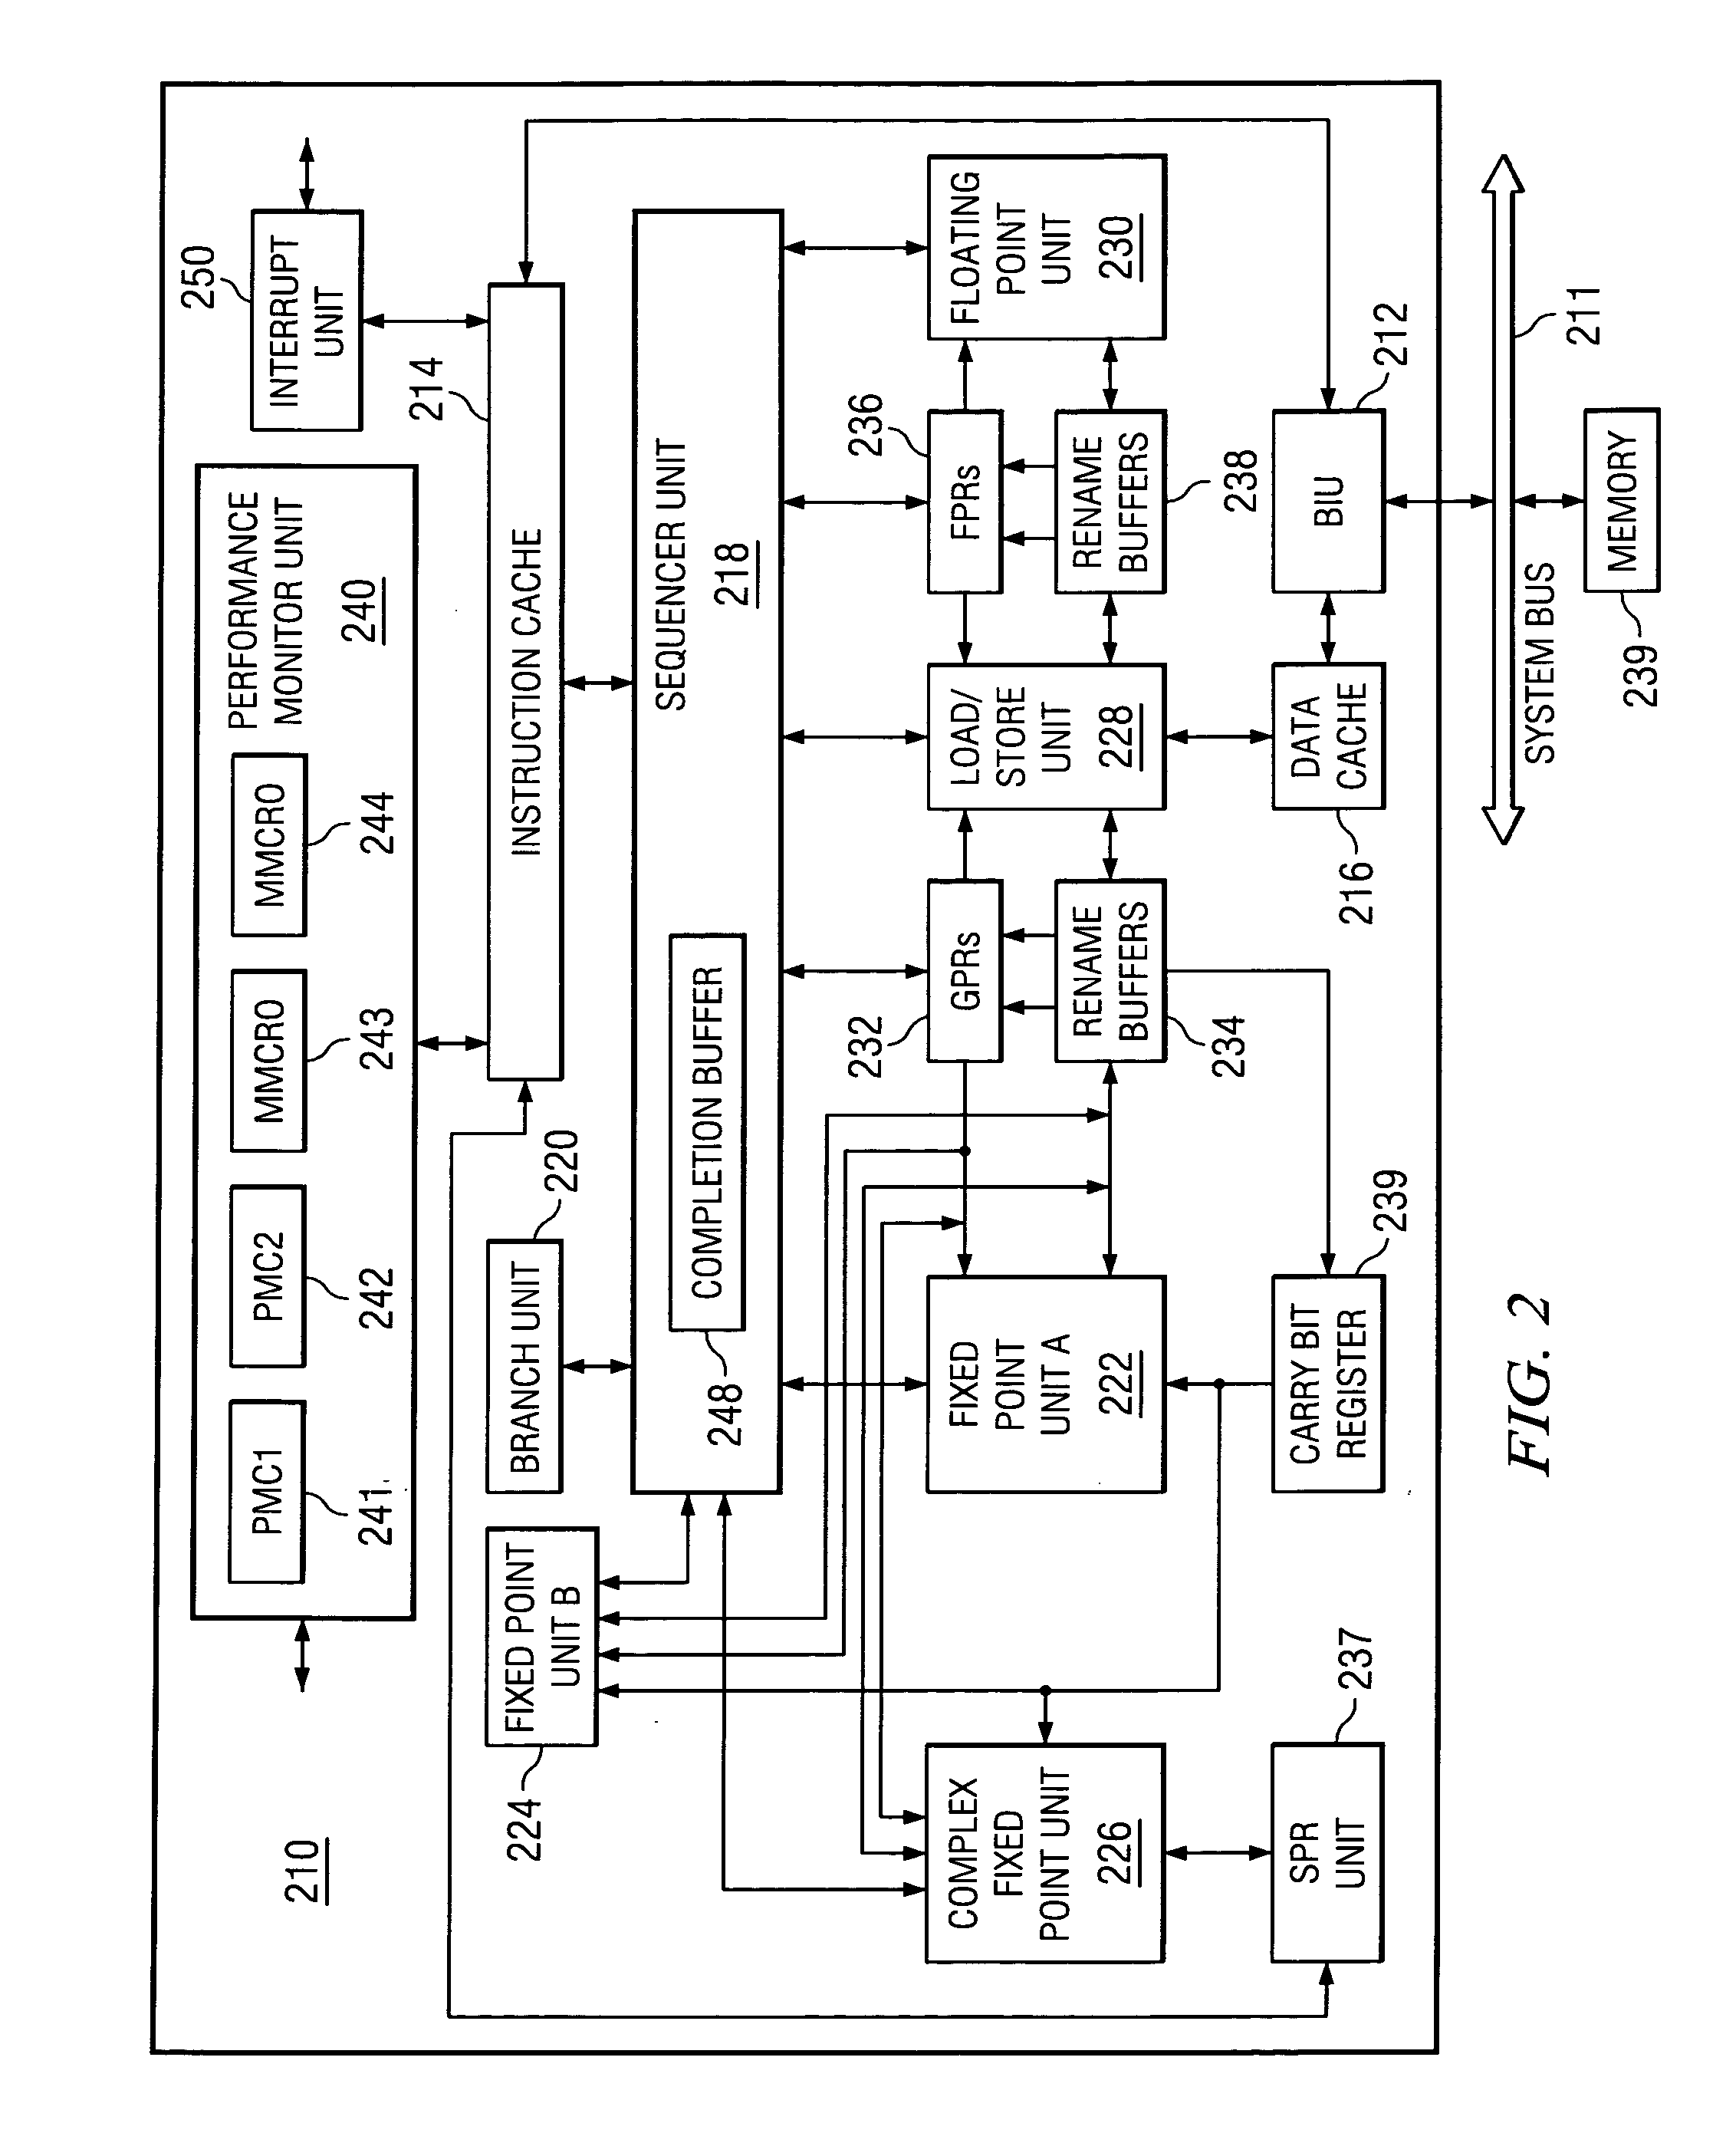 Method and apparatus to autonomically profile applications